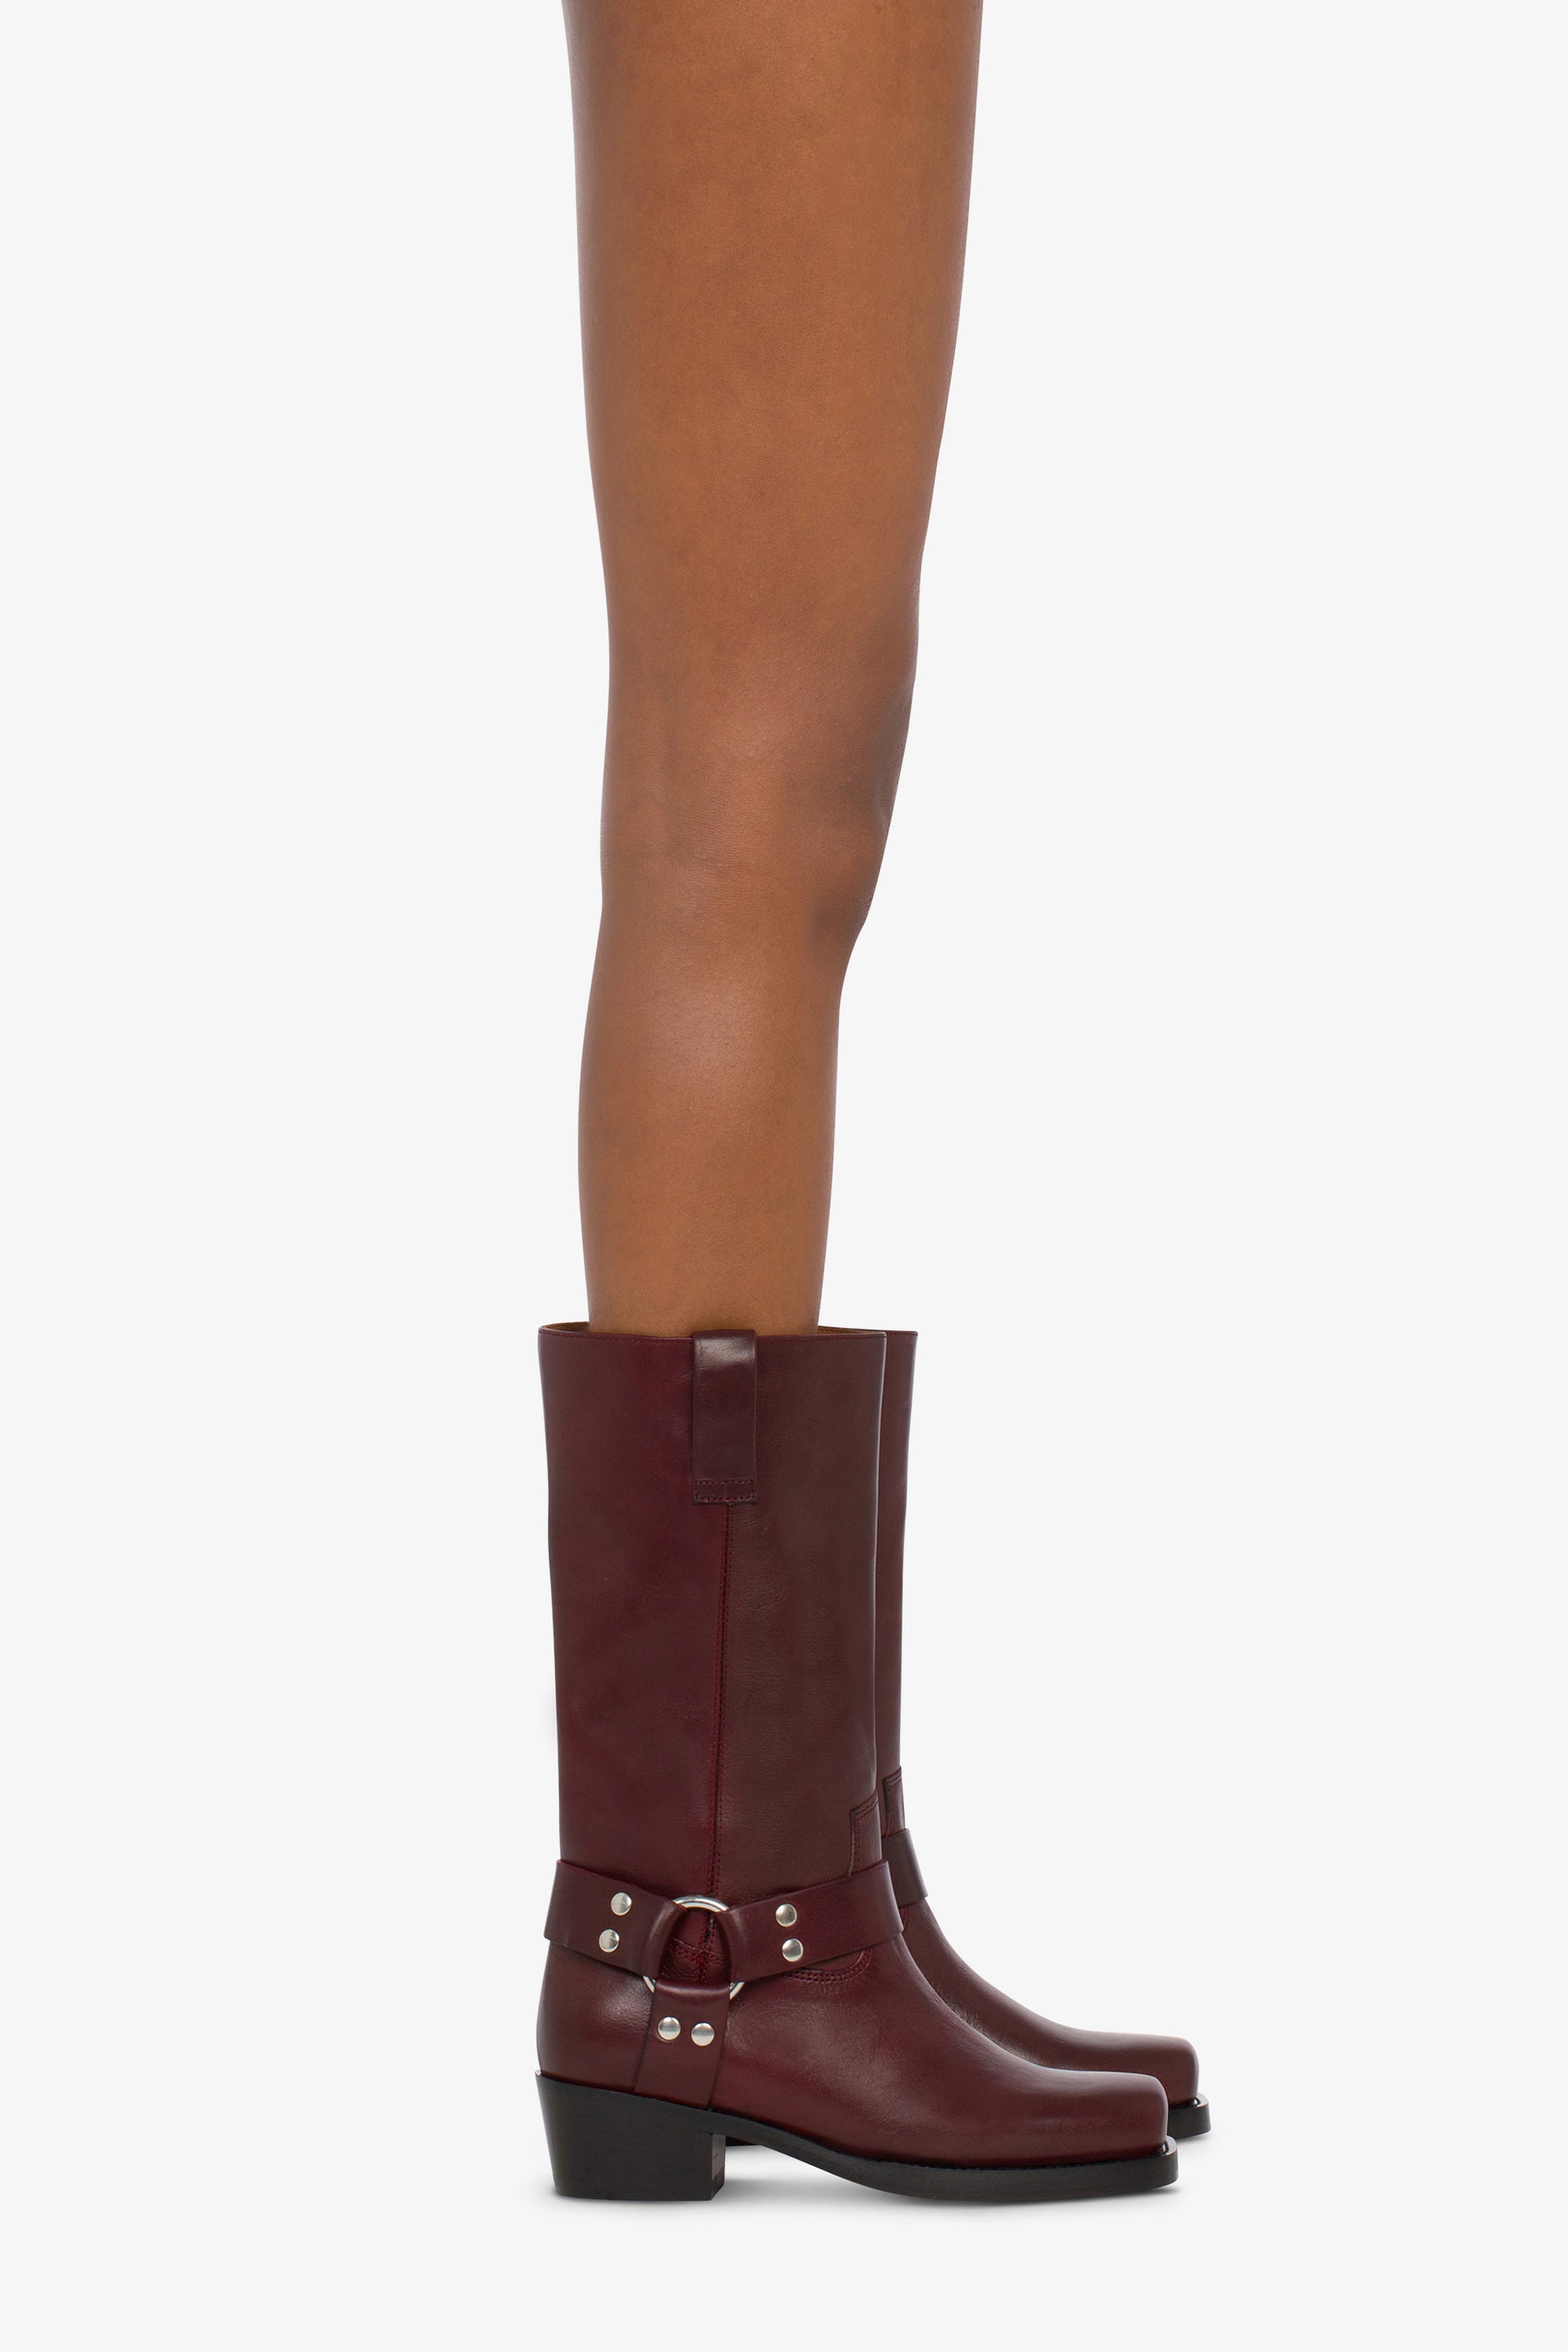 Square-toe boots in smooth plum leather - Indossato